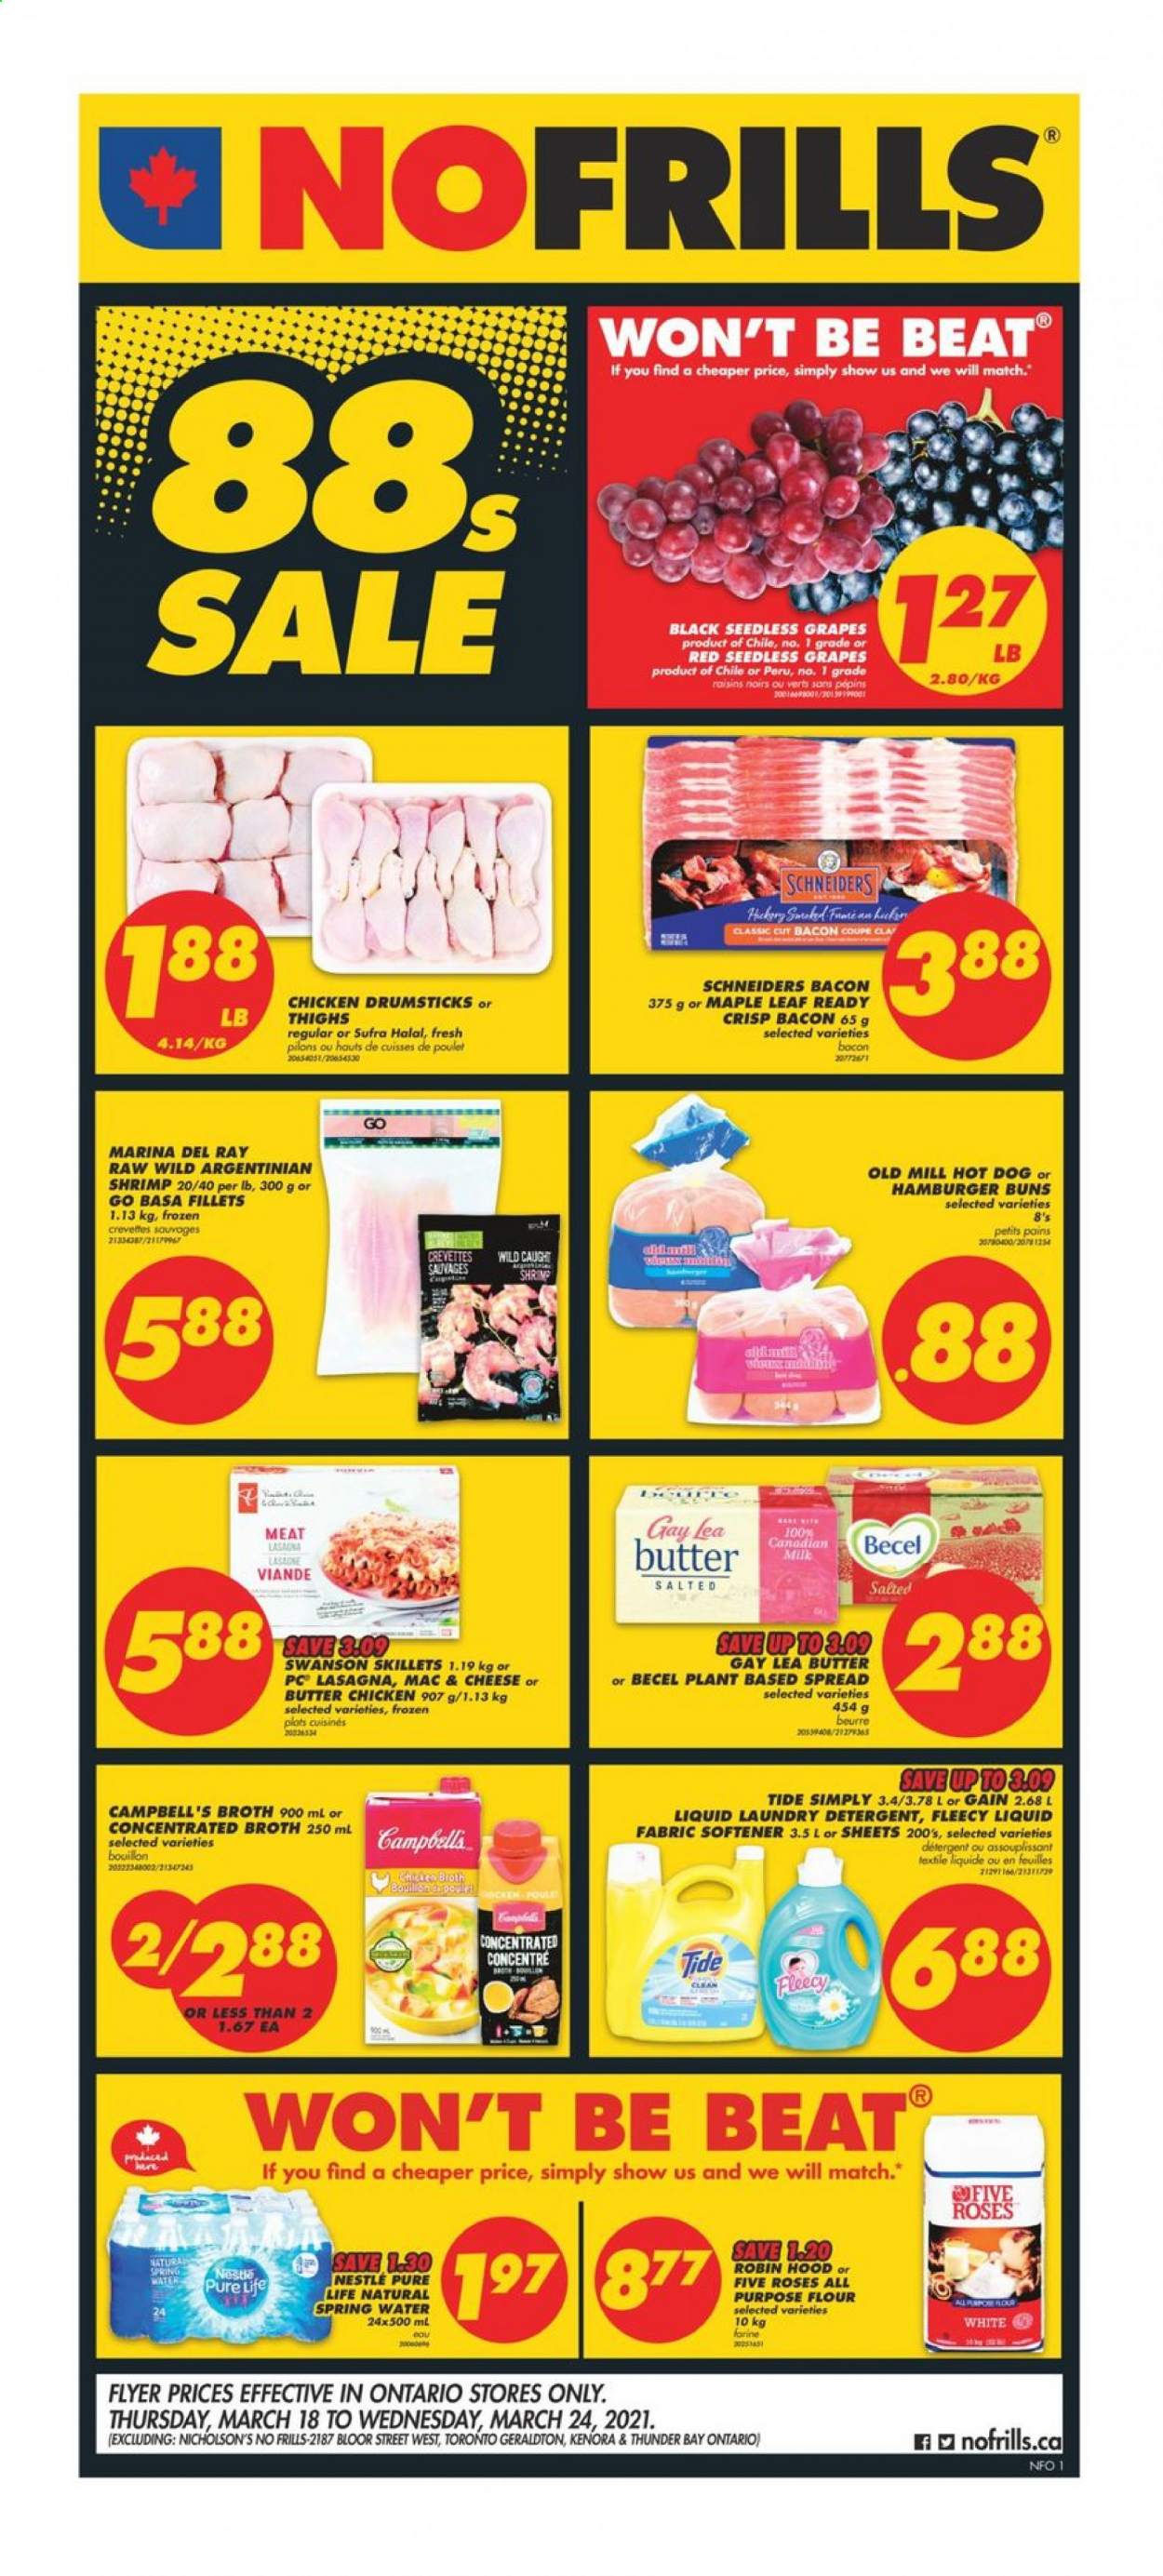 thumbnail - No Frills Flyer - March 18, 2021 - March 24, 2021 - Sales products - buns, burger buns, grapes, seedless grapes, shrimps, Campbell's, hot dog, lasagna meal, bacon, milk, all purpose flour, bouillon, flour, broth, dried fruit, spring water, chicken drumsticks, chicken, Gain, Tide, fabric softener, laundry detergent, Nestlé, raisins. Page 1.